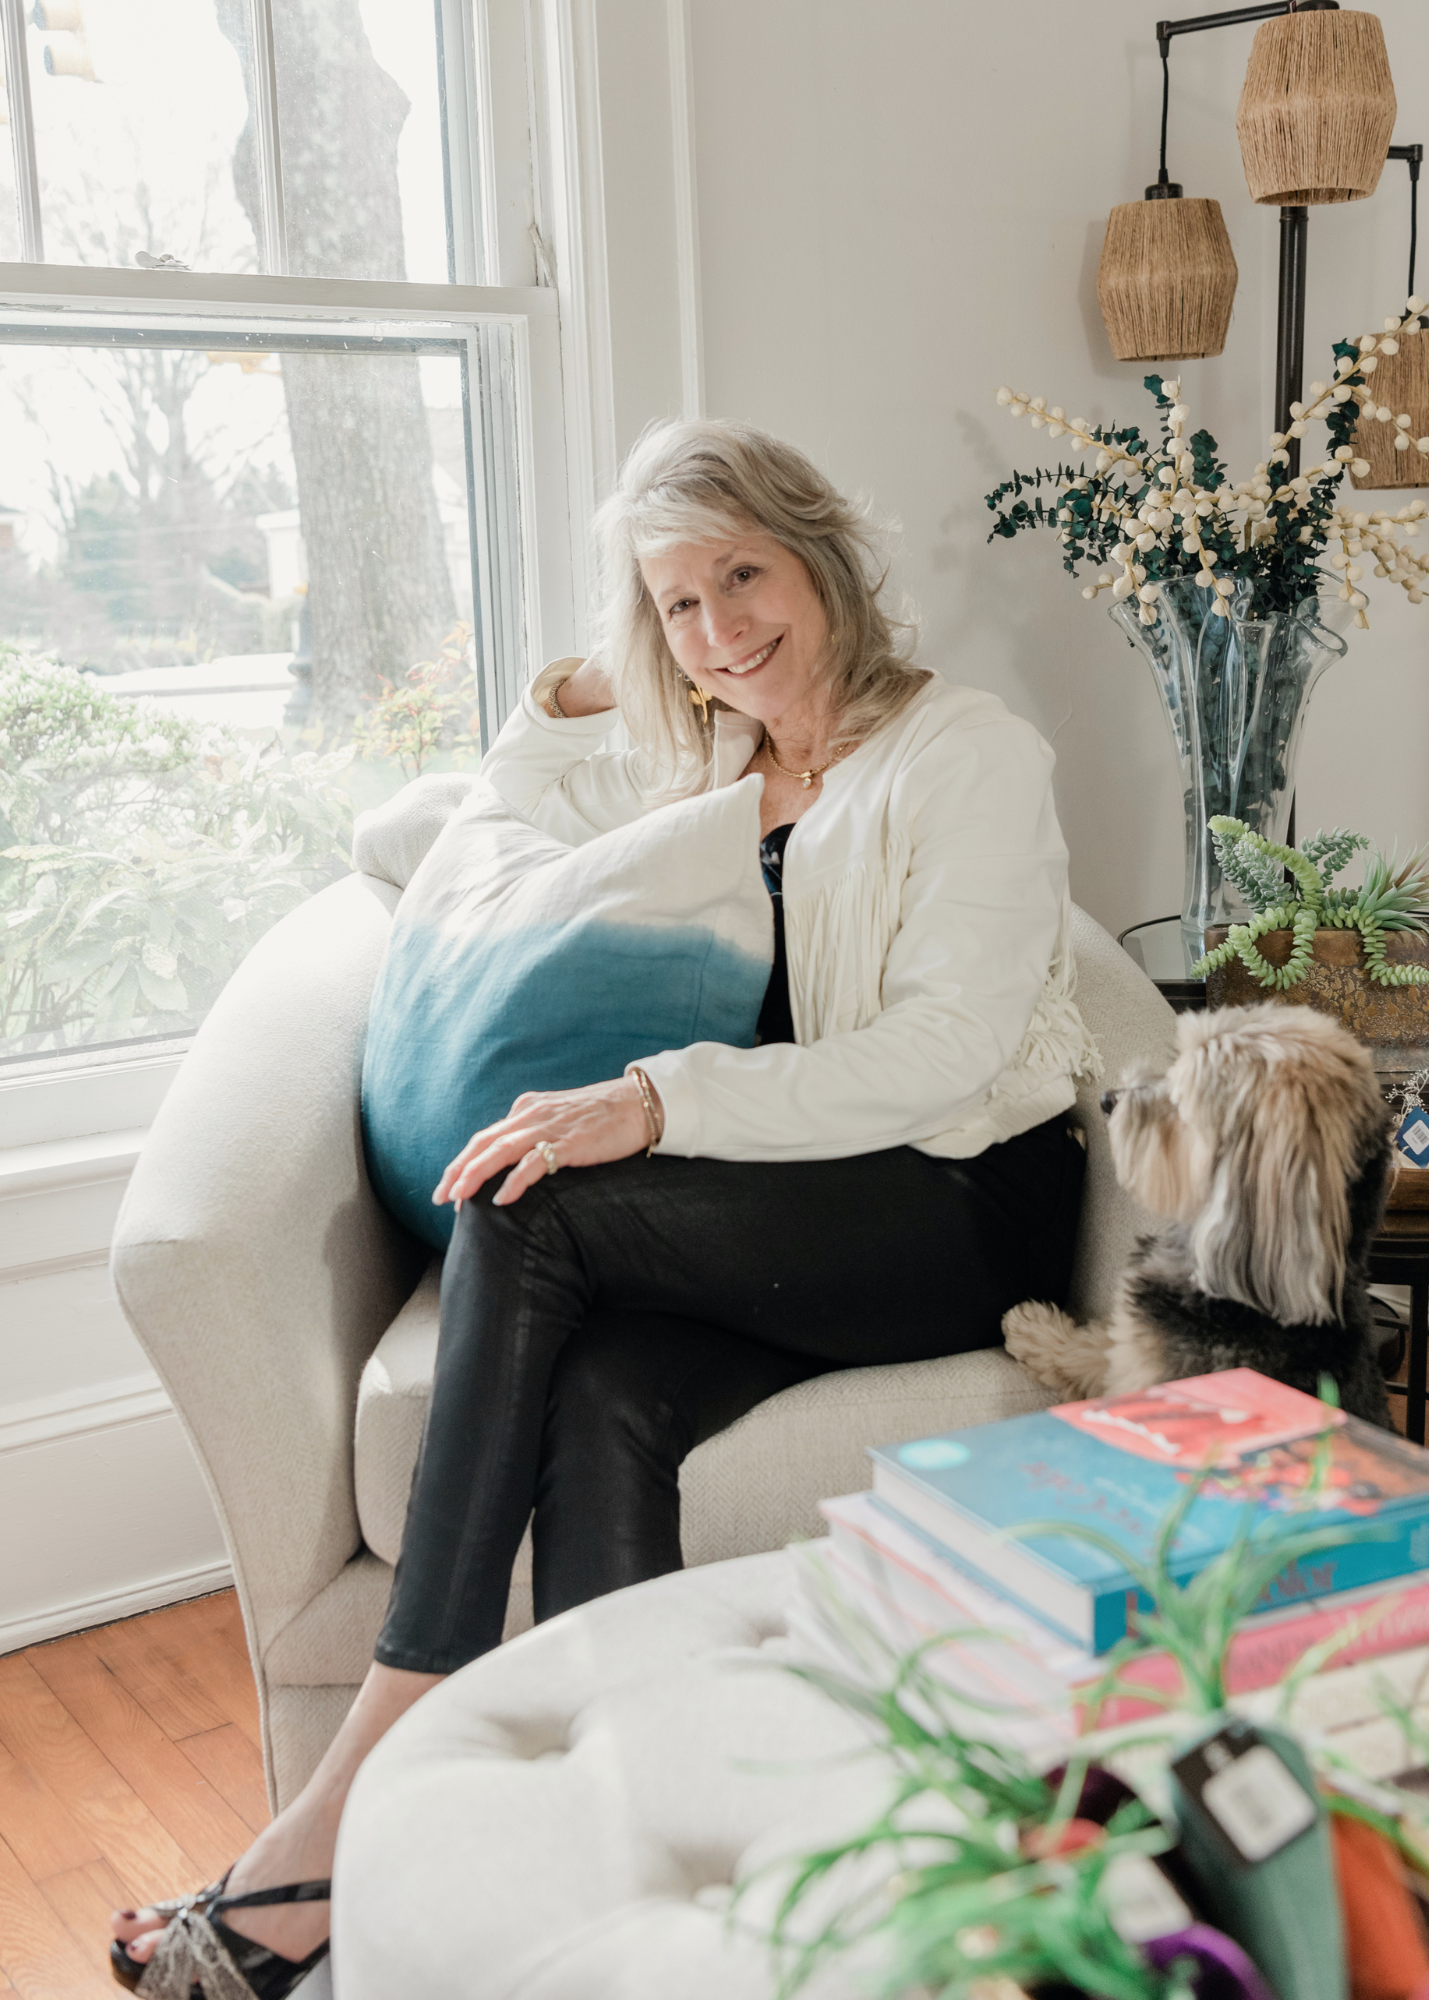 Lori Savio, Interior Designer and Owner of Home, Heart & Soul, sitting on a beige chair by a window in her home décor shop